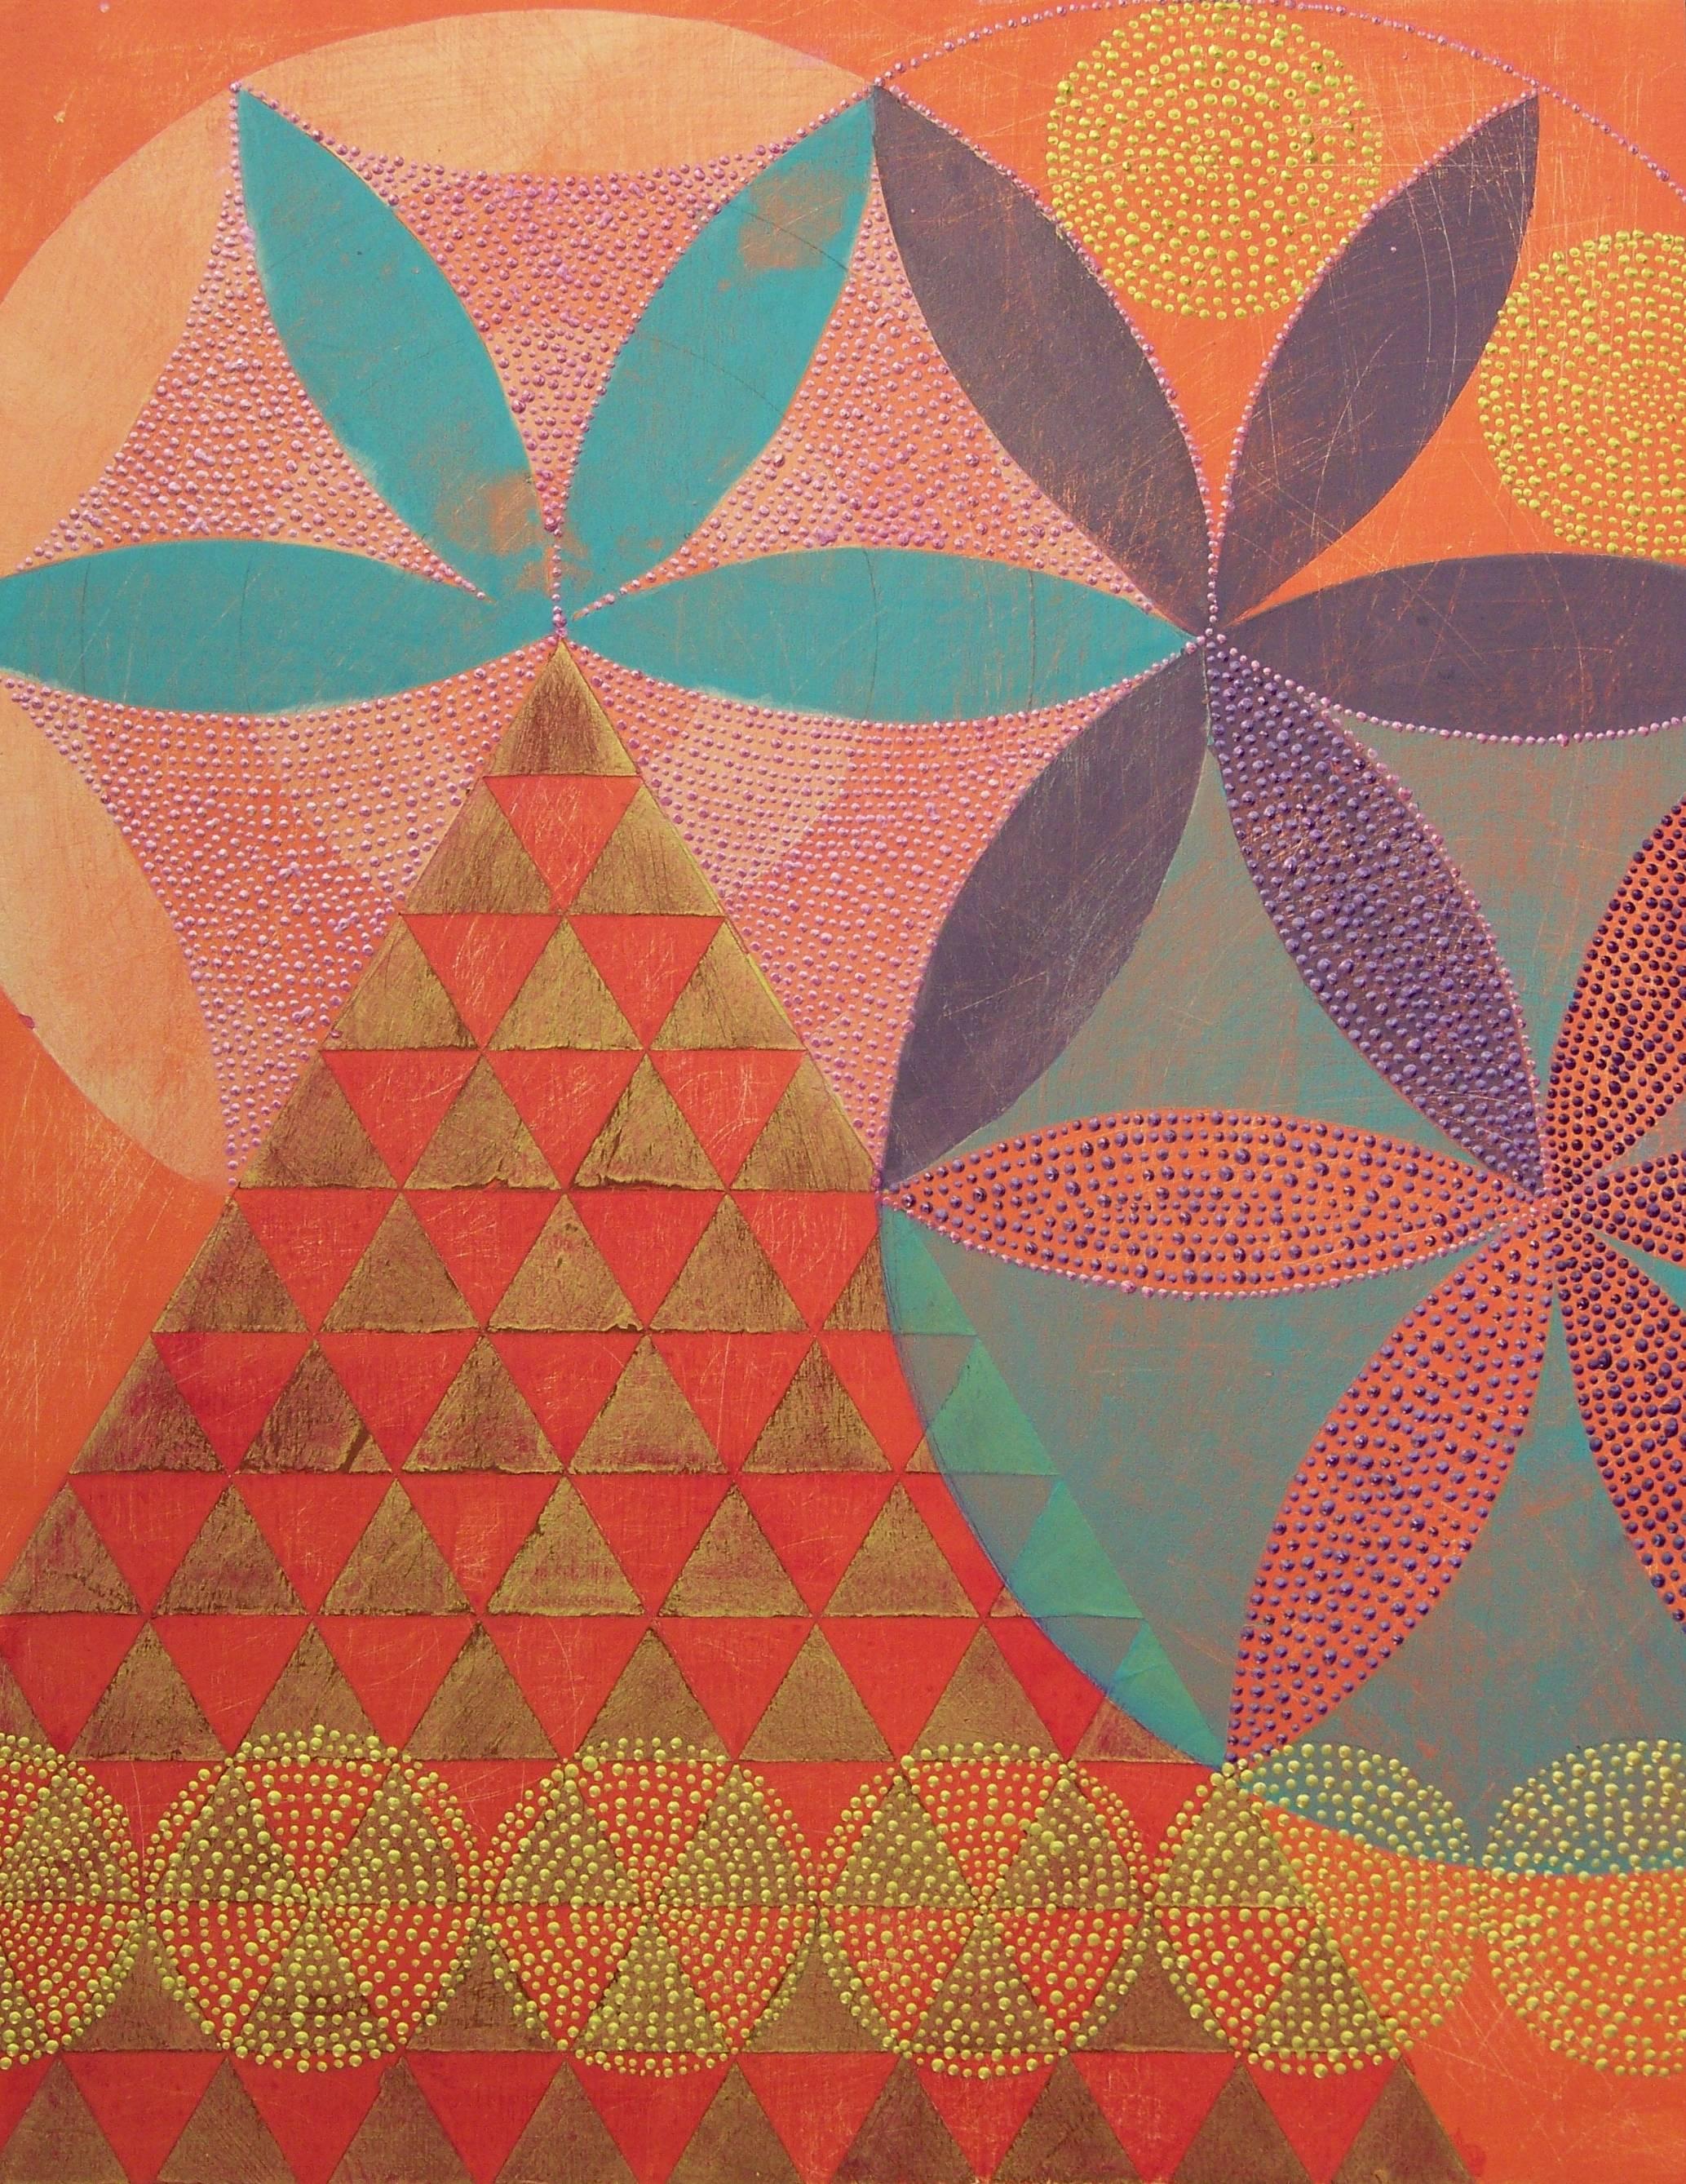 "Triangles 5", abstract, geometric, coral, gold, violet, teal, acrylic painting - Painting by Denise Driscoll